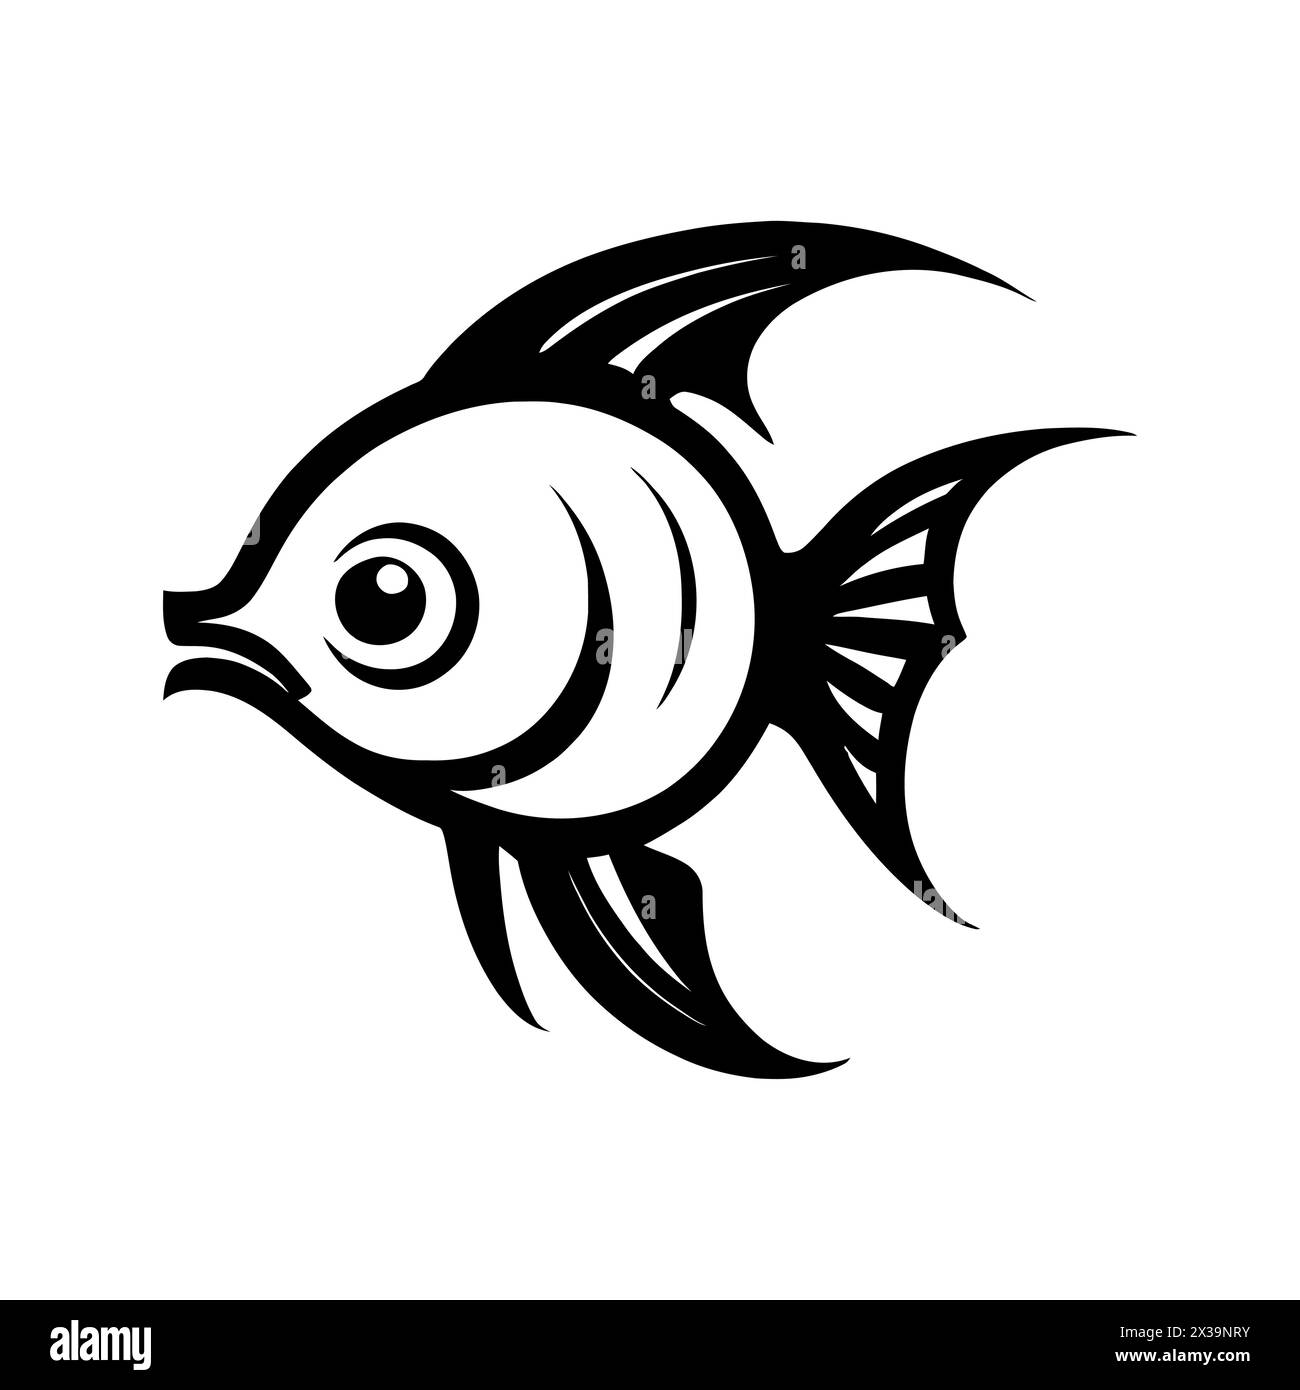 Black fish vector icon isolated on white background Stock Vector